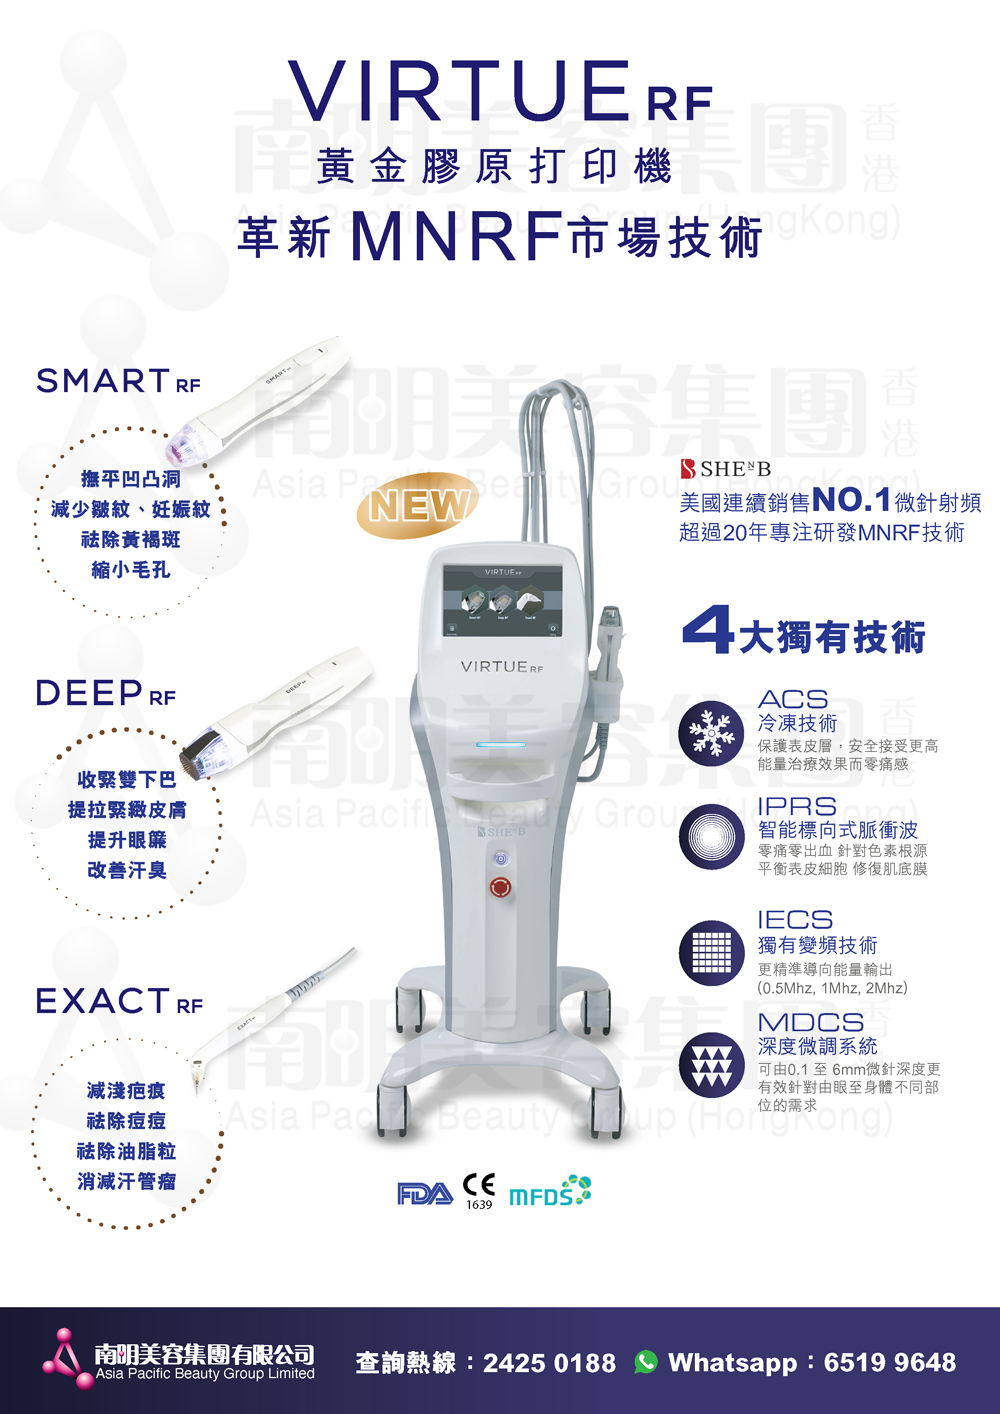 VIRTUE RF, Microneedle, Microneedle Radio Frequency, Bumps, Acne Marks, Insulation Microneedle, Blepharoplasty, Cold Single Frequency Microneedle, EINXEL, Morpheus, Sylfirm, Scarlet, Agnes, Hironic